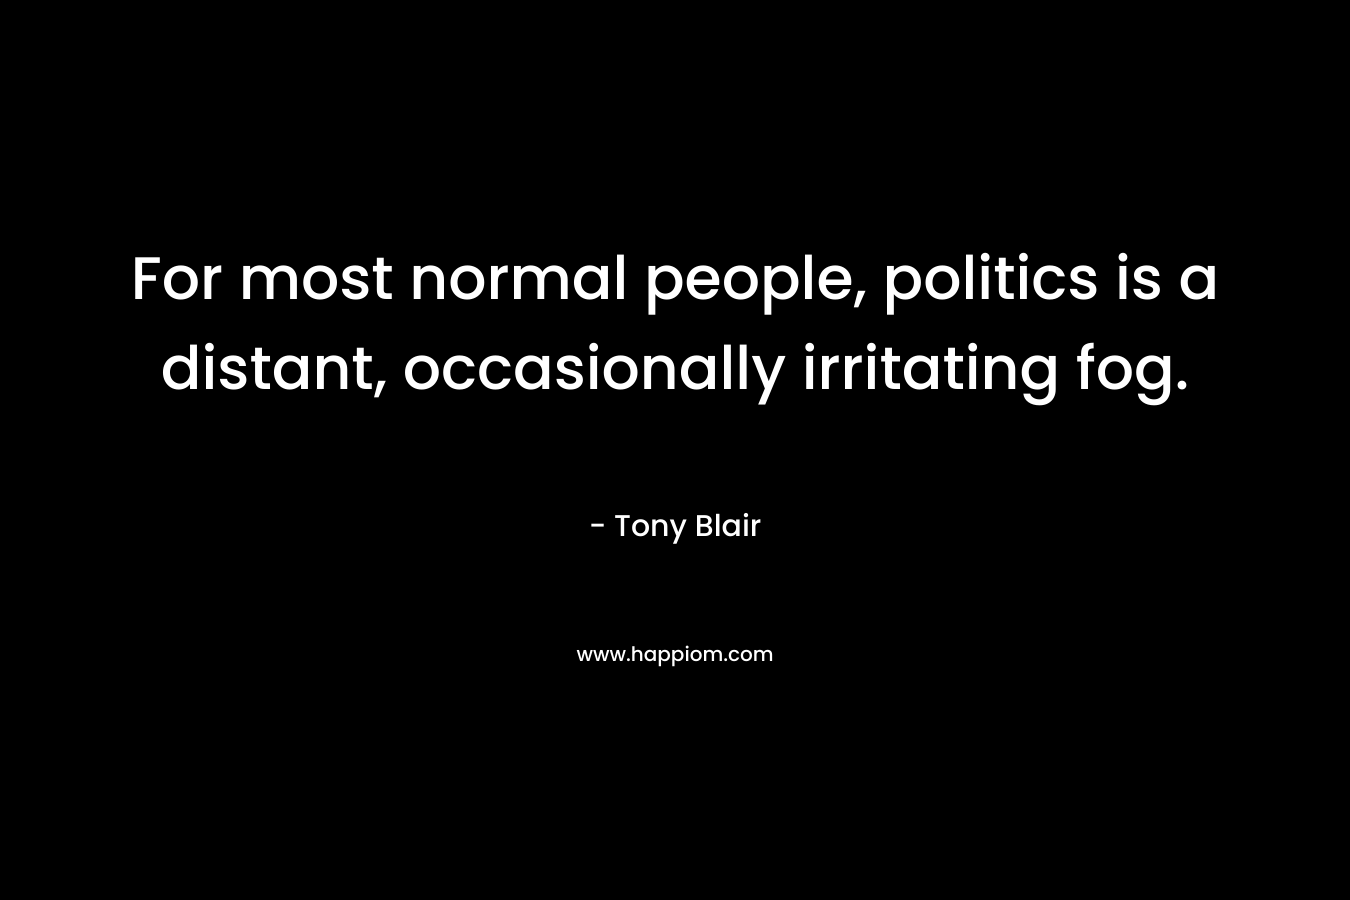 For most normal people, politics is a distant, occasionally irritating fog.